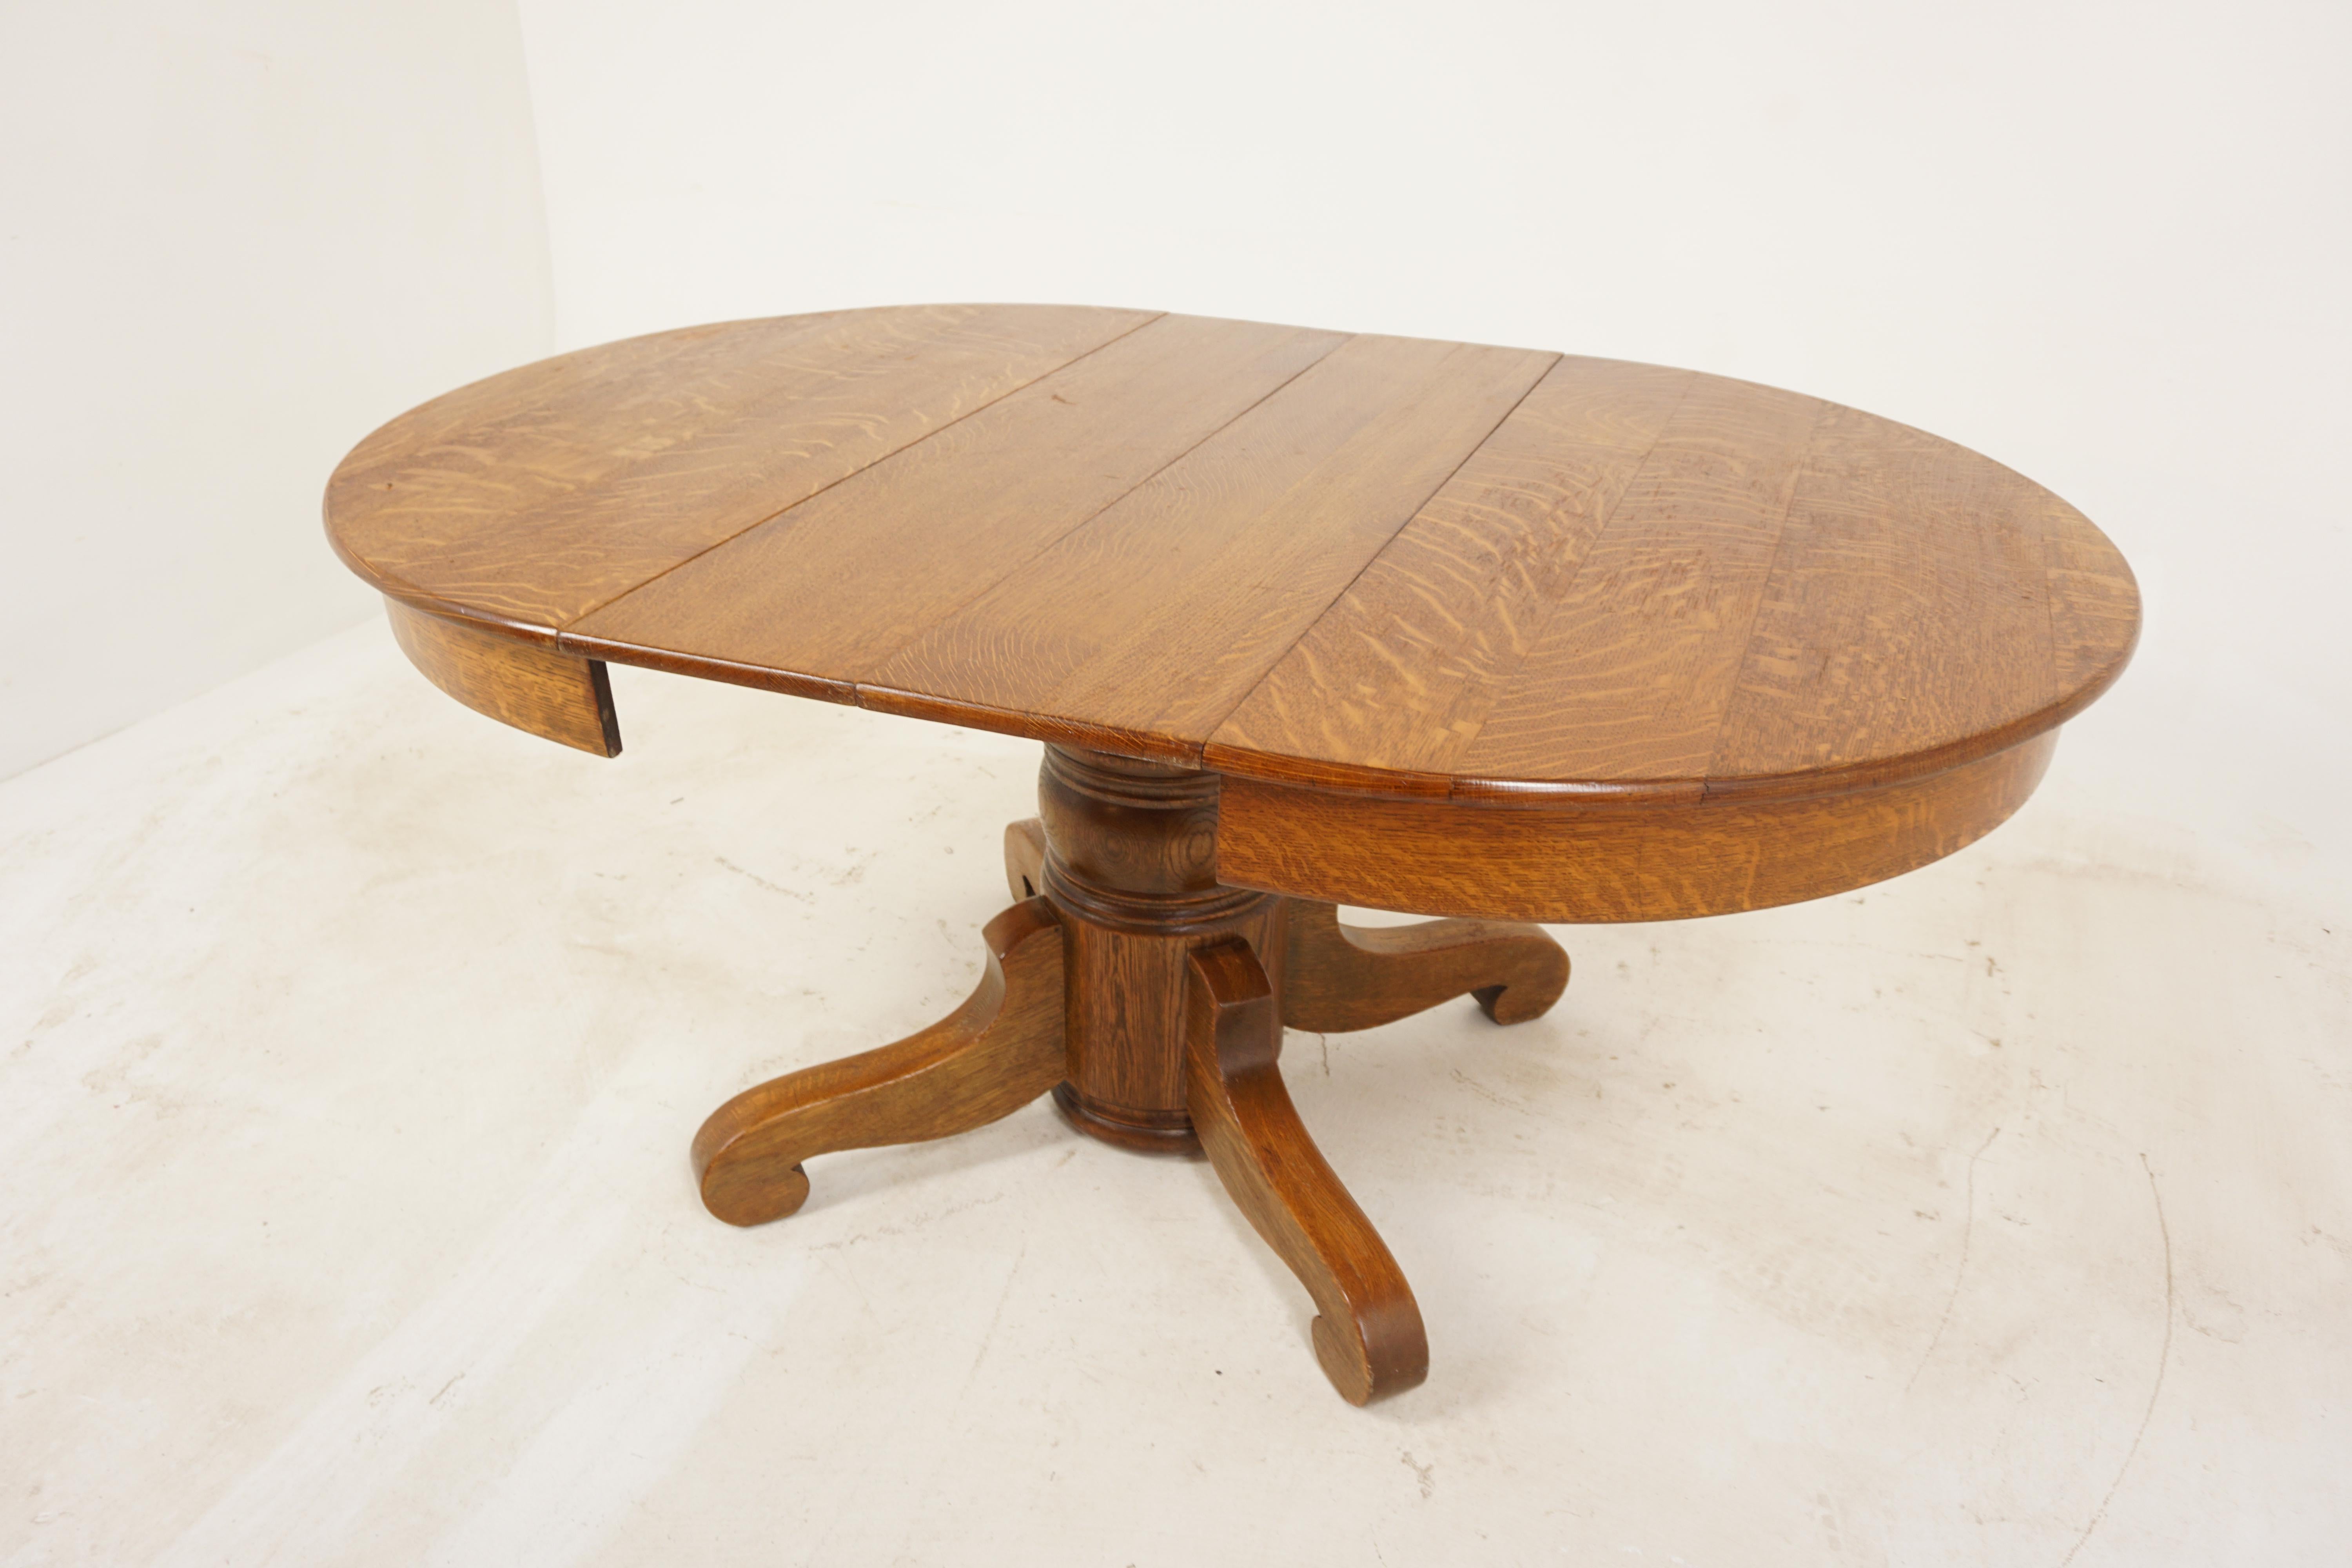 Early 20th Century Antique Tiger Oak Round Table Pedestal Base, 2 Leaves, America 1910, B2873